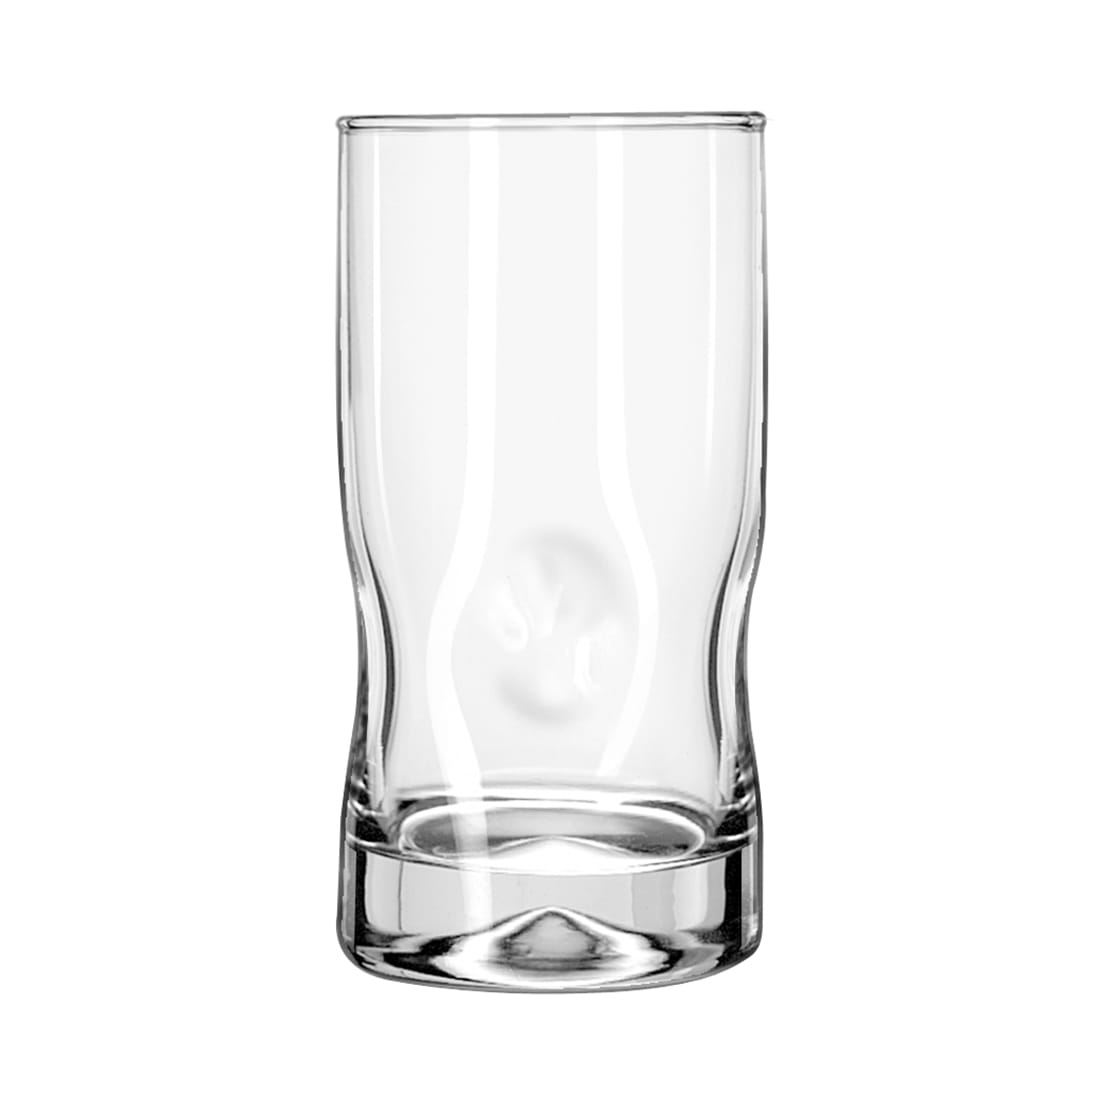 Water/ Juice Glass Archives - Apurbo Store